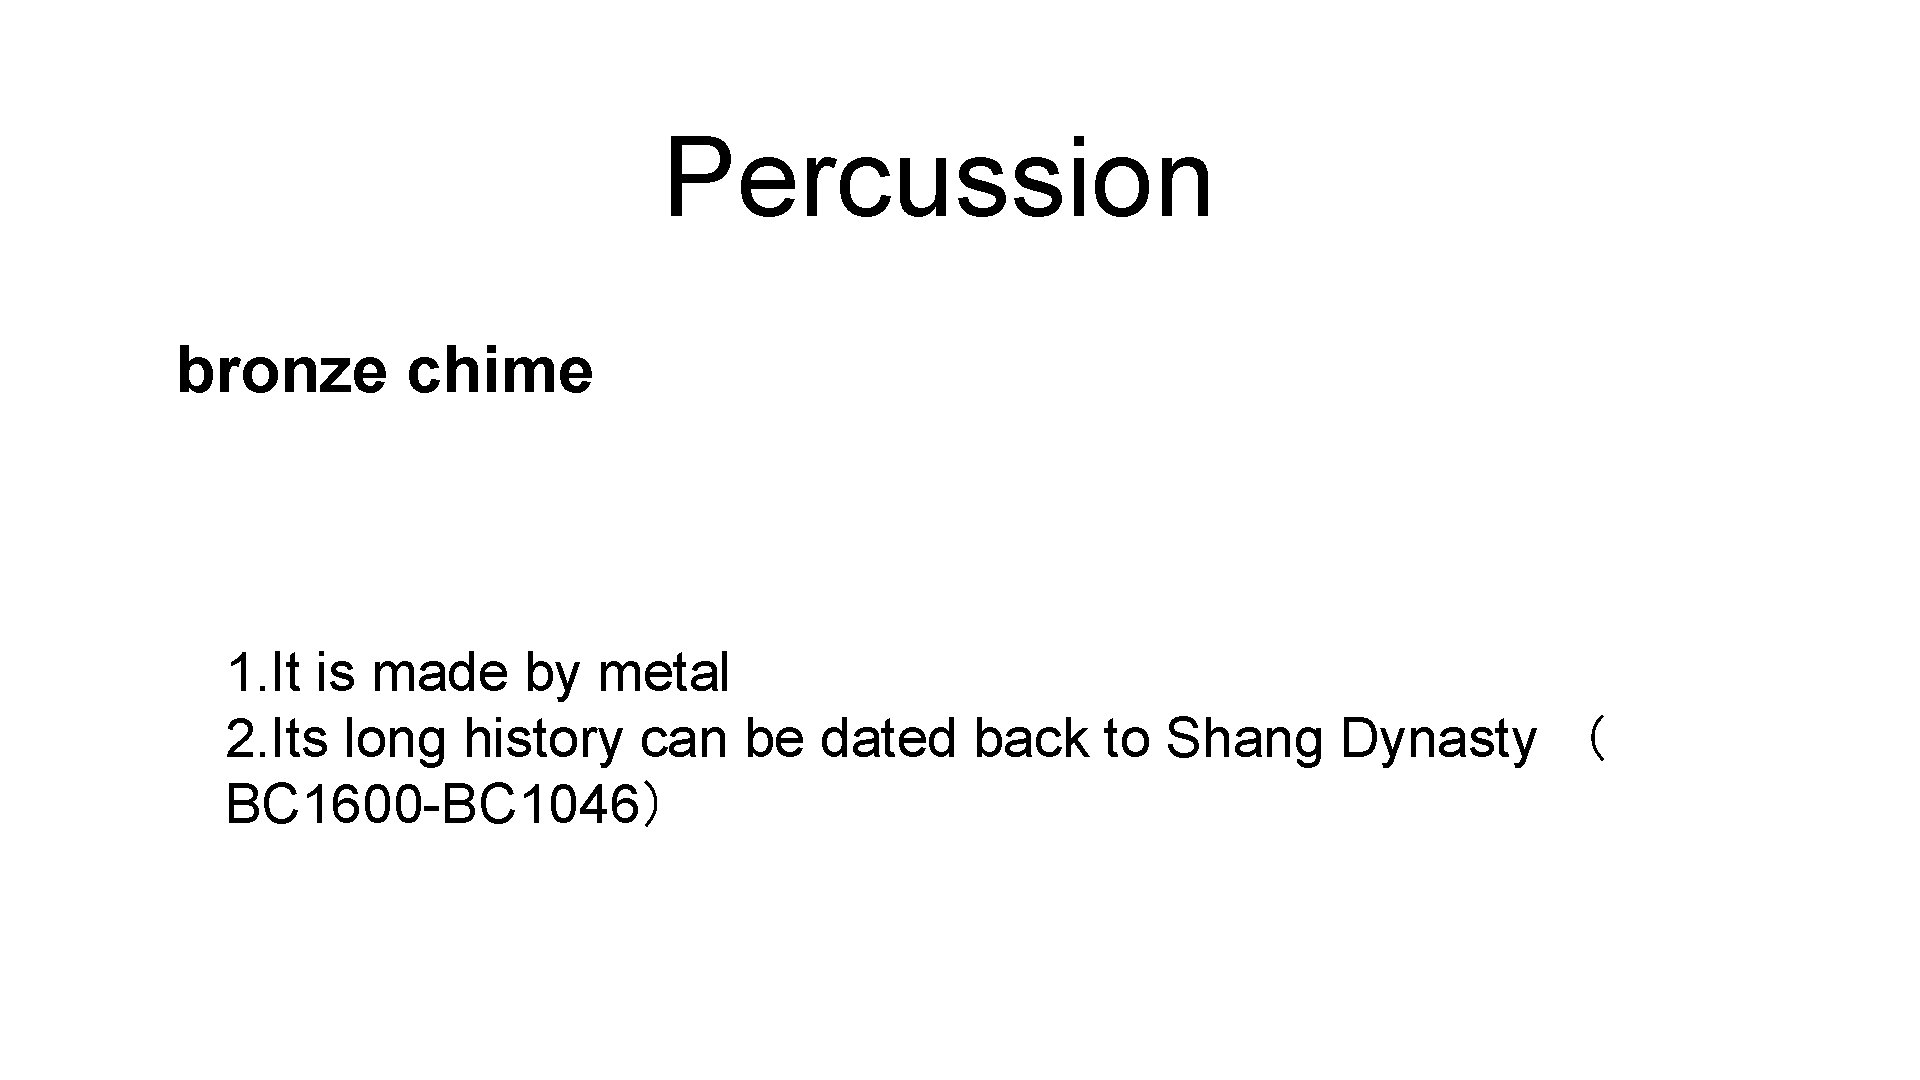 Percussion bronze chime 1. It is made by metal 2. Its long history can